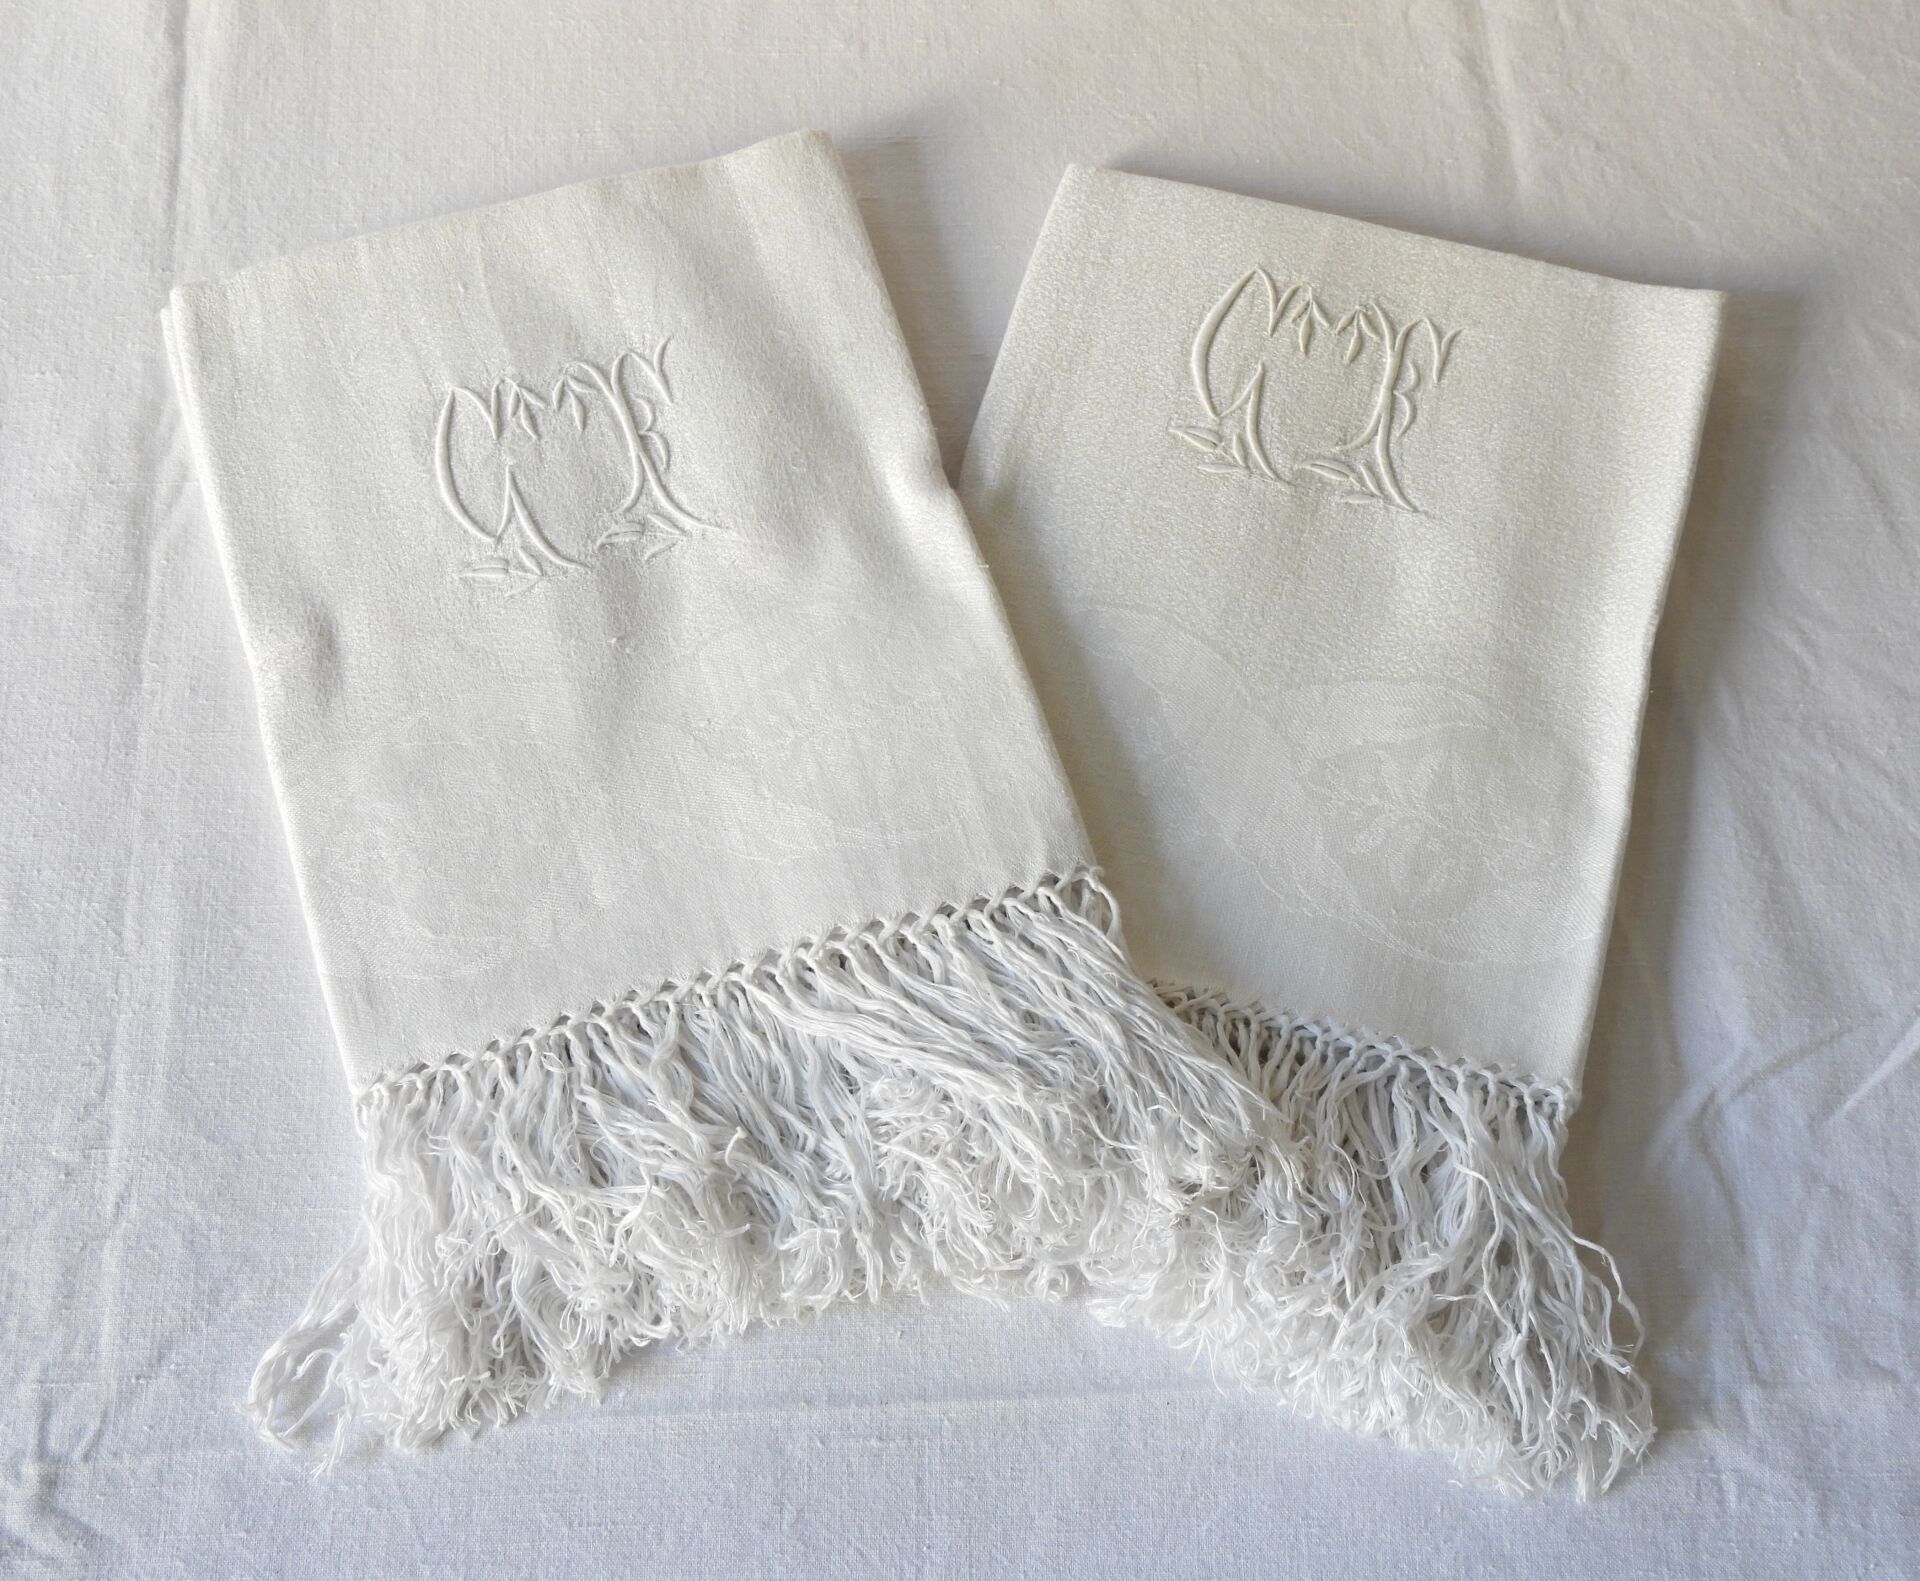 Null Four guest towels figured G.F. Damask border.